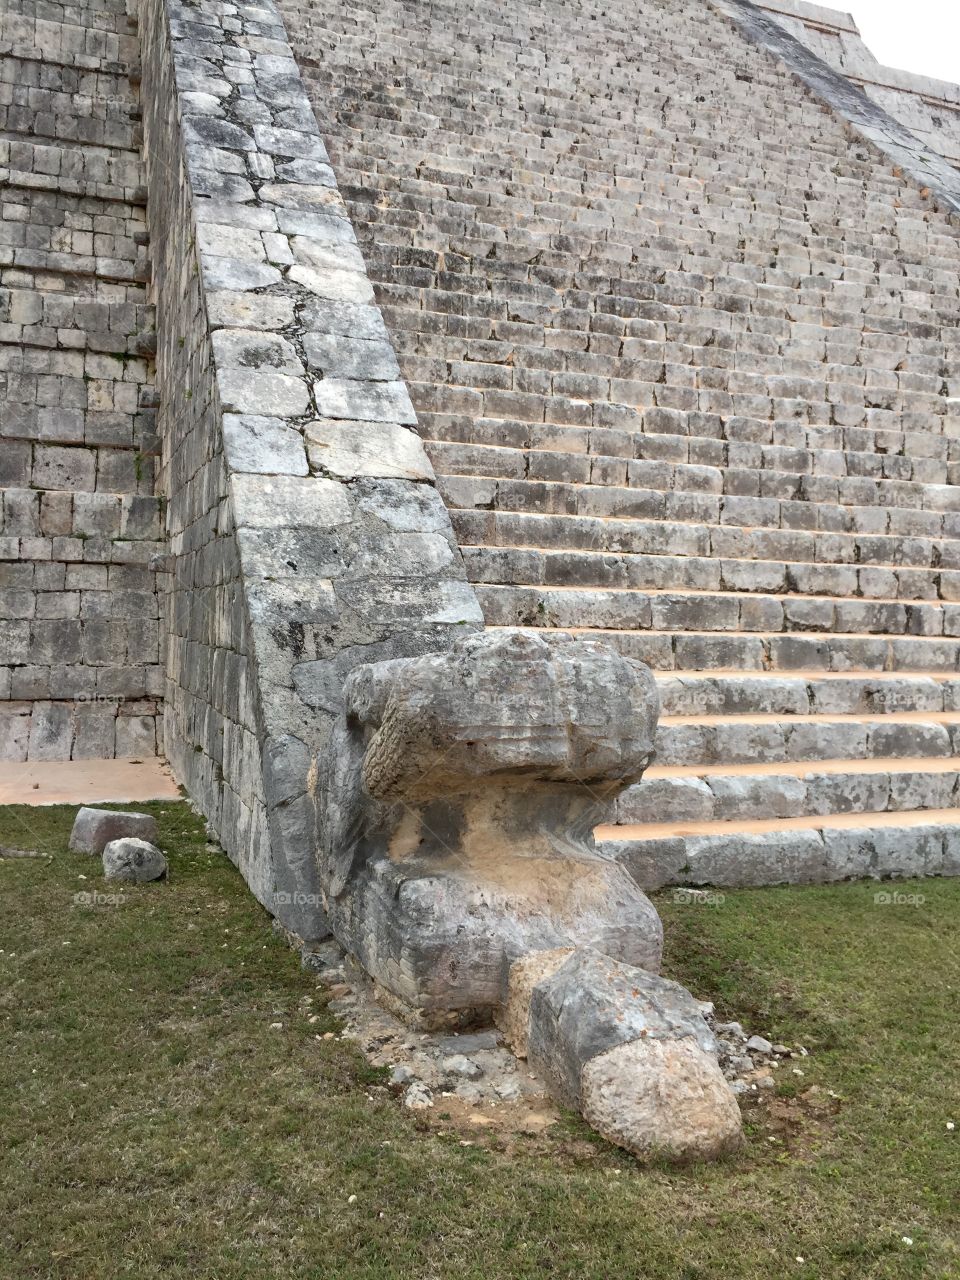 Ruins in mexico